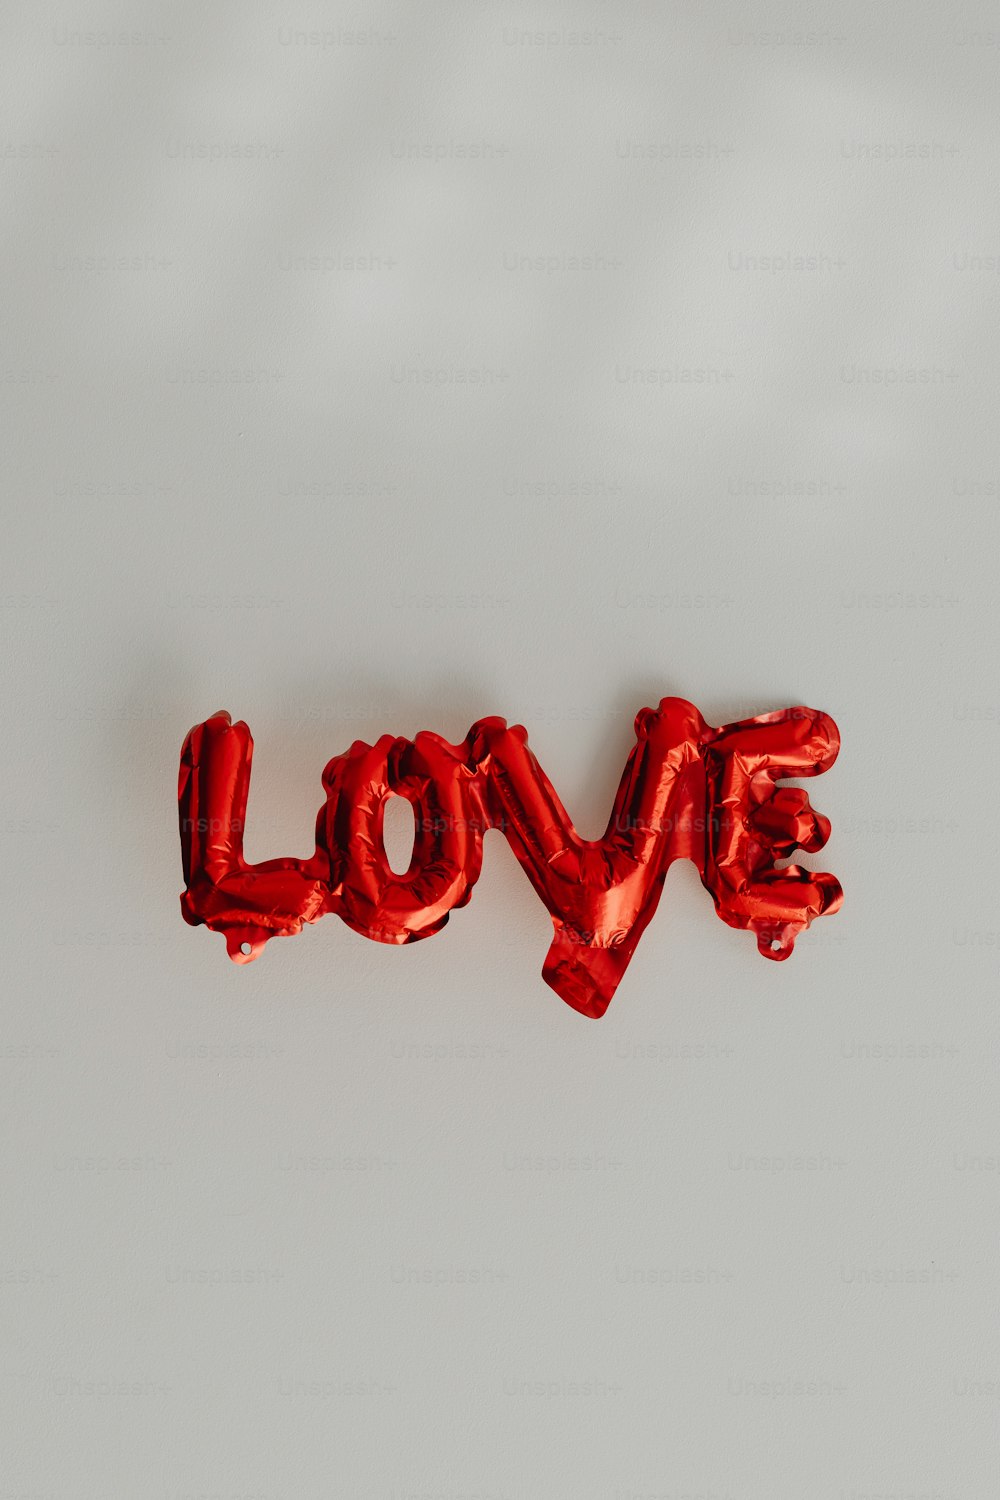 the word love spelled with red foil balloons